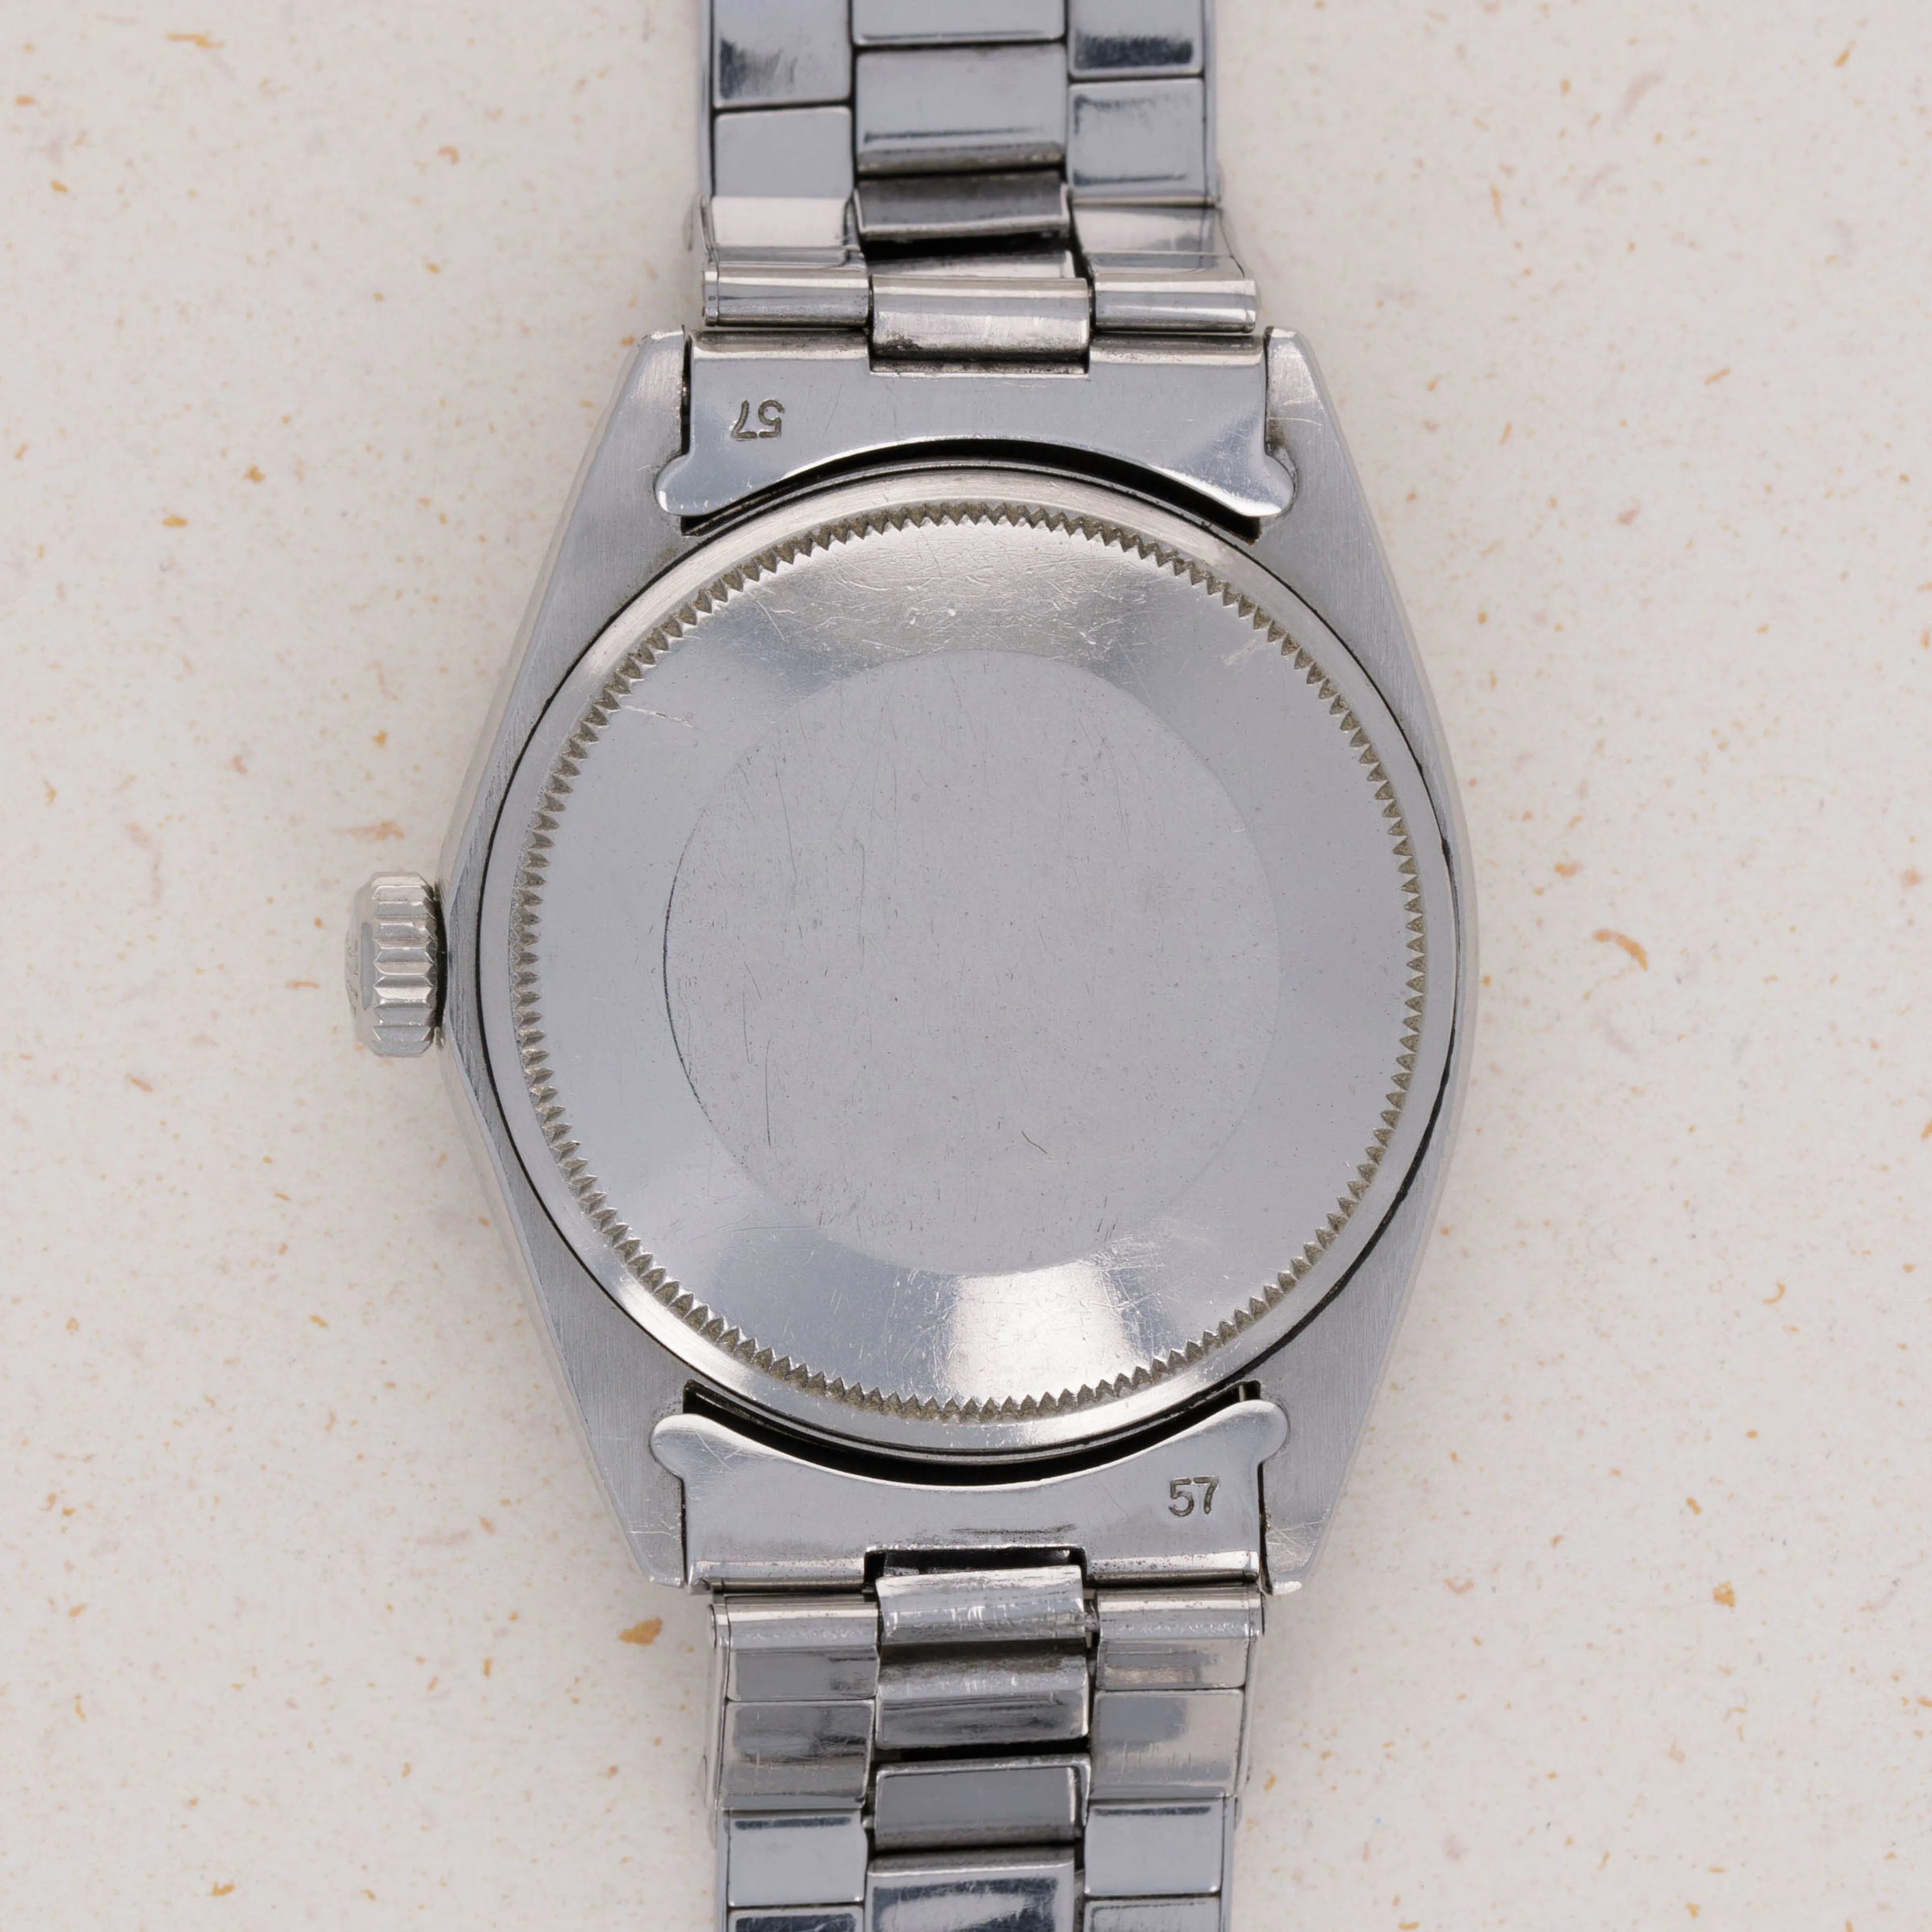 Rolex Oyster Perpetual Date 1500 34mm Stainless steel Silver 5